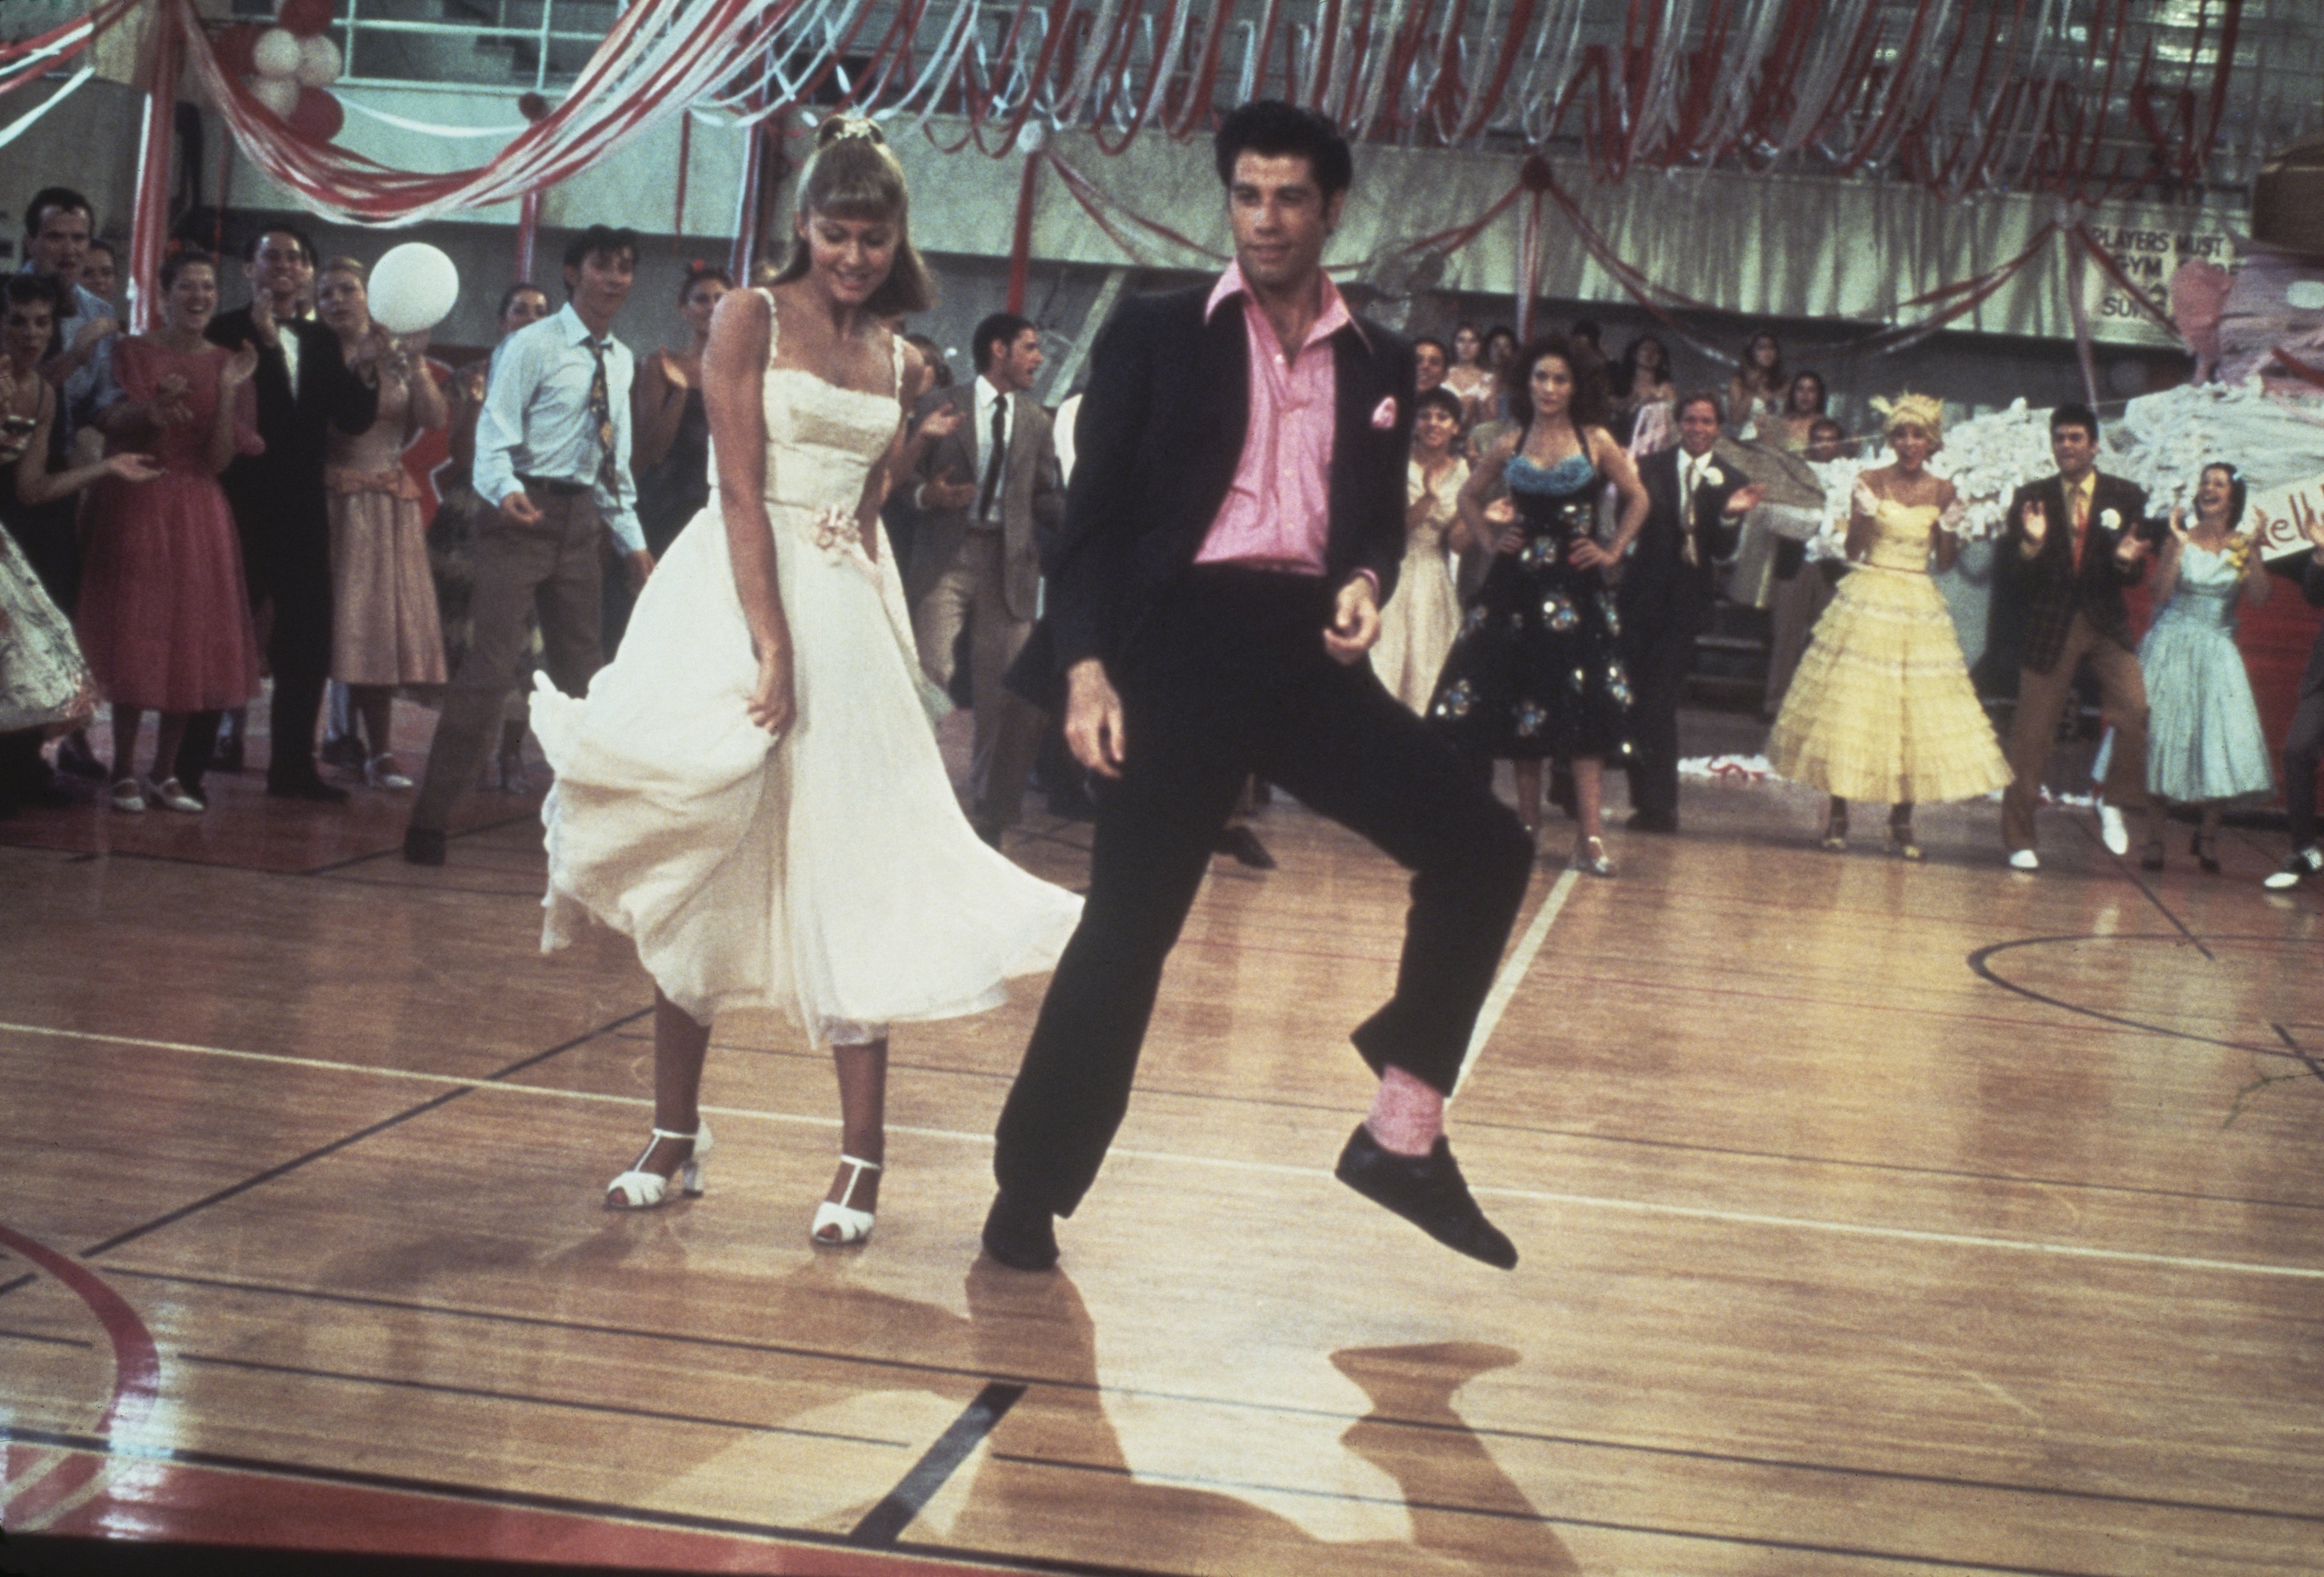 Olivia Newton-John and John Travolta dancing in a crowded high school gym in the movie, "Grease," in 1978. / Source: Getty Images